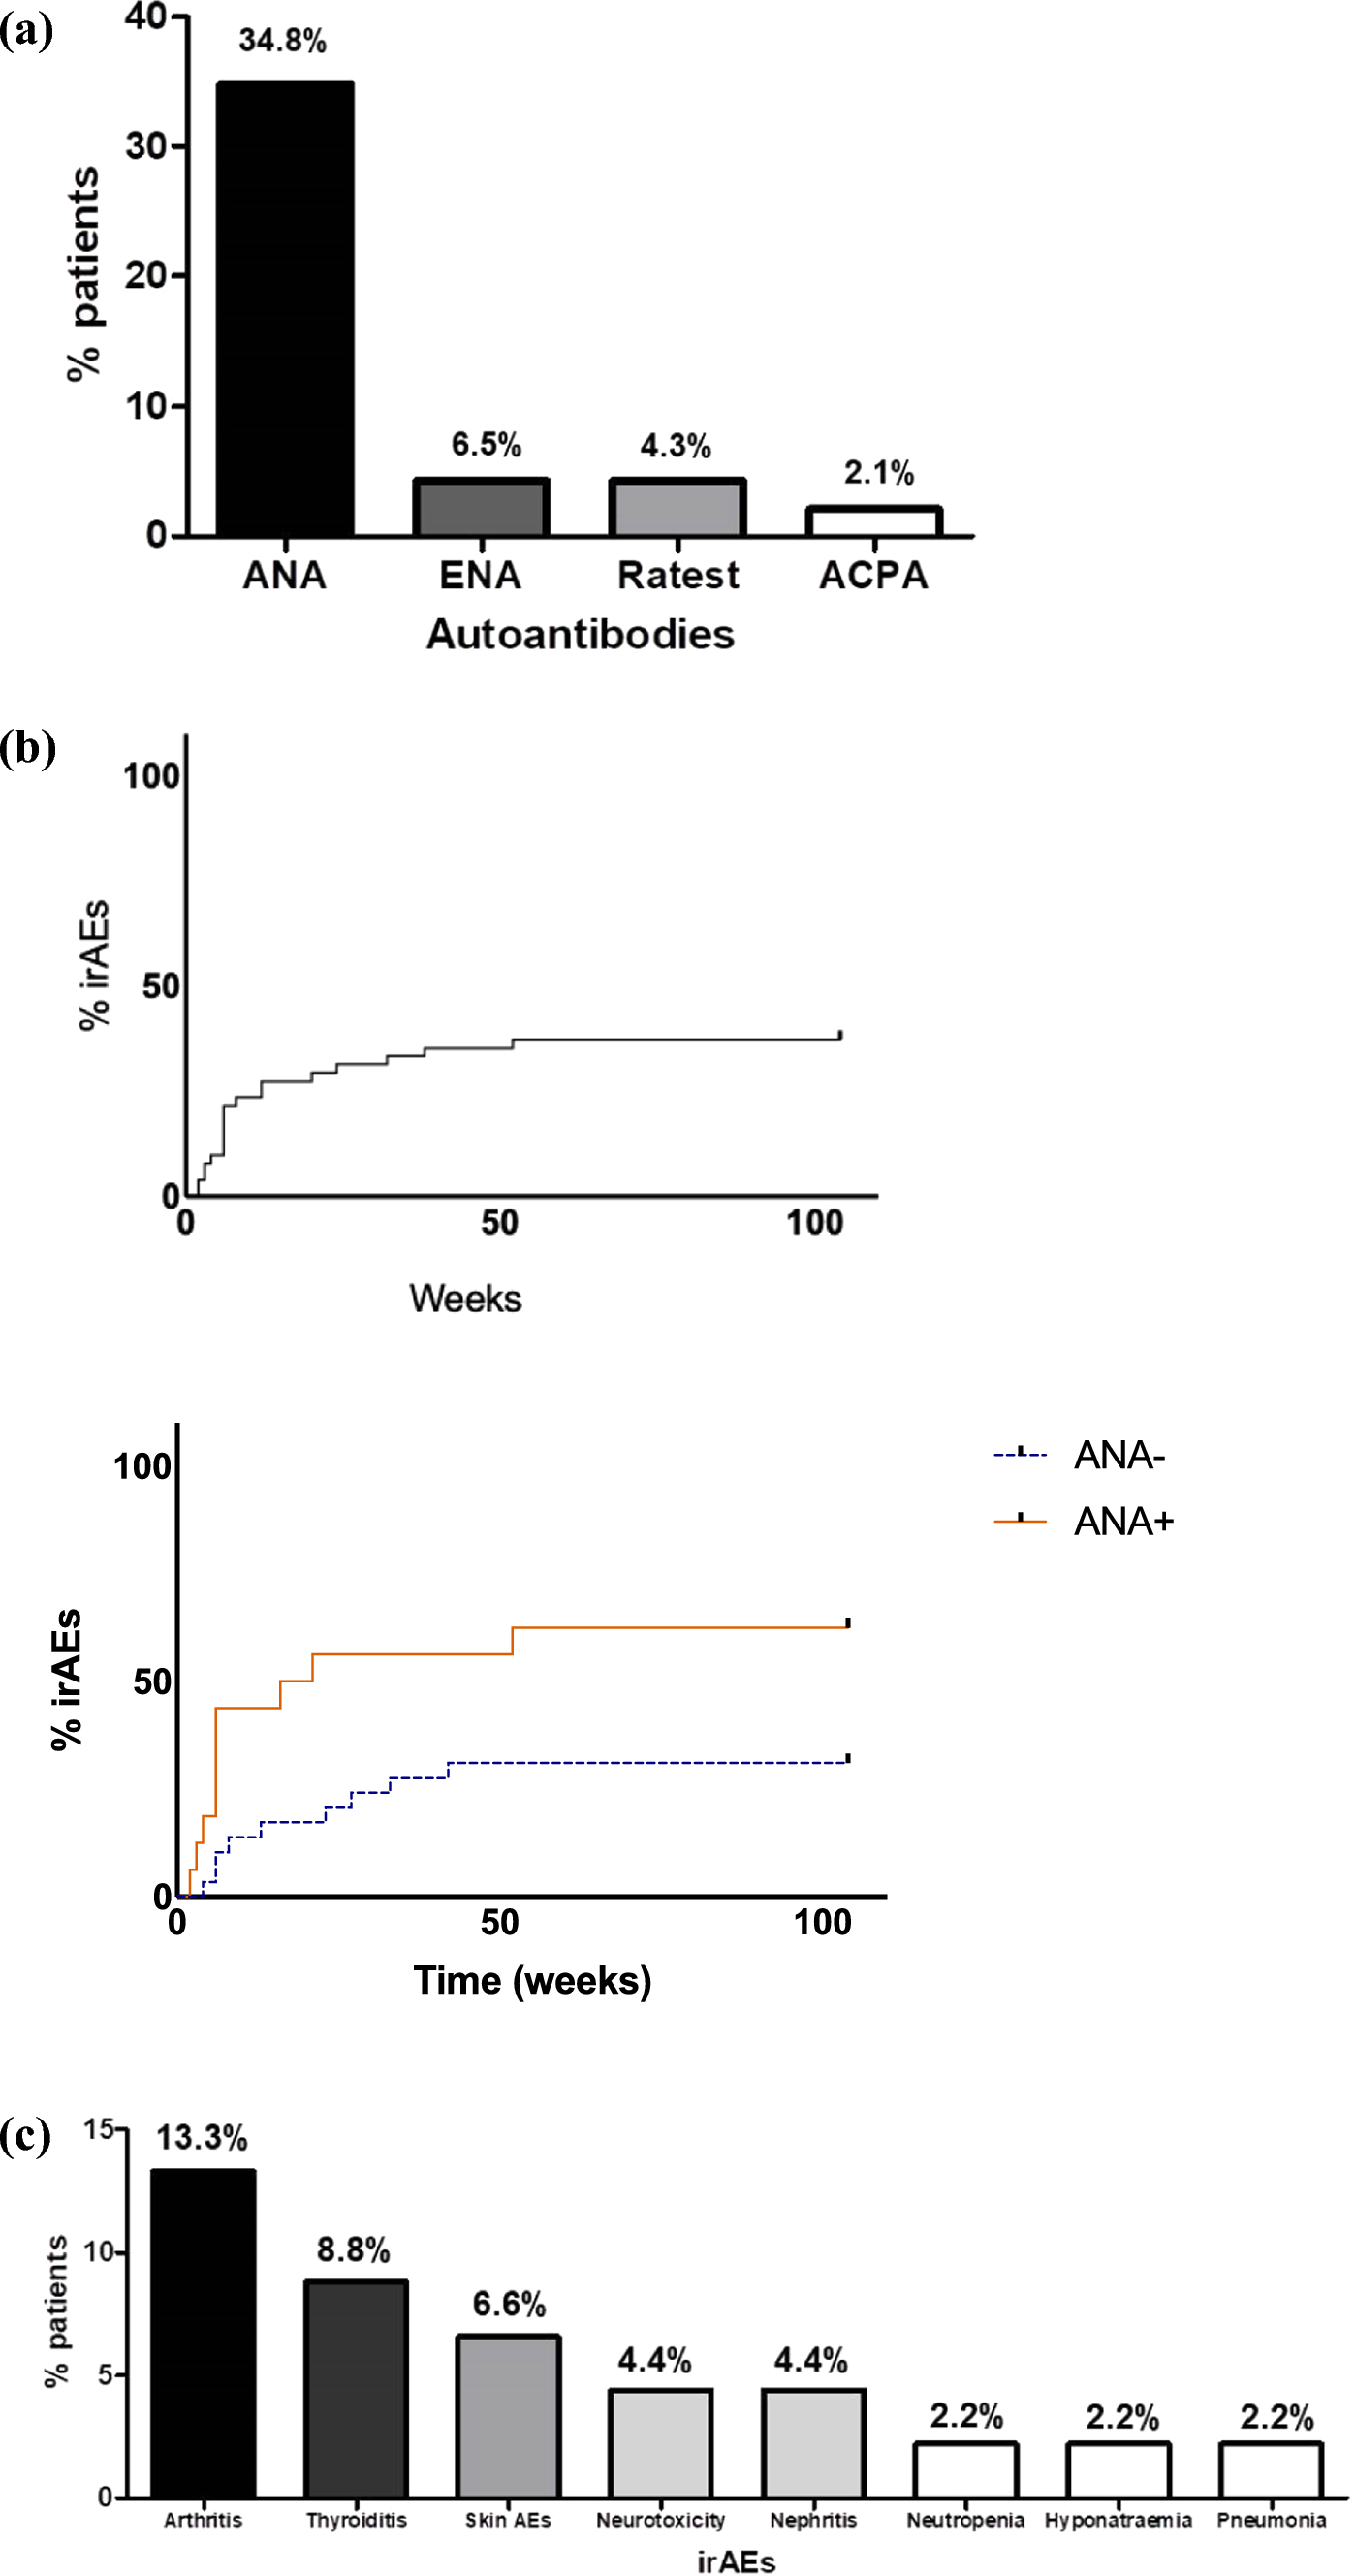 Antinuclear antibodies may predict the development of immune-related adverse events in asymptomatic patients treated with immune checkpoint inhibitors: results from a single-center cohort